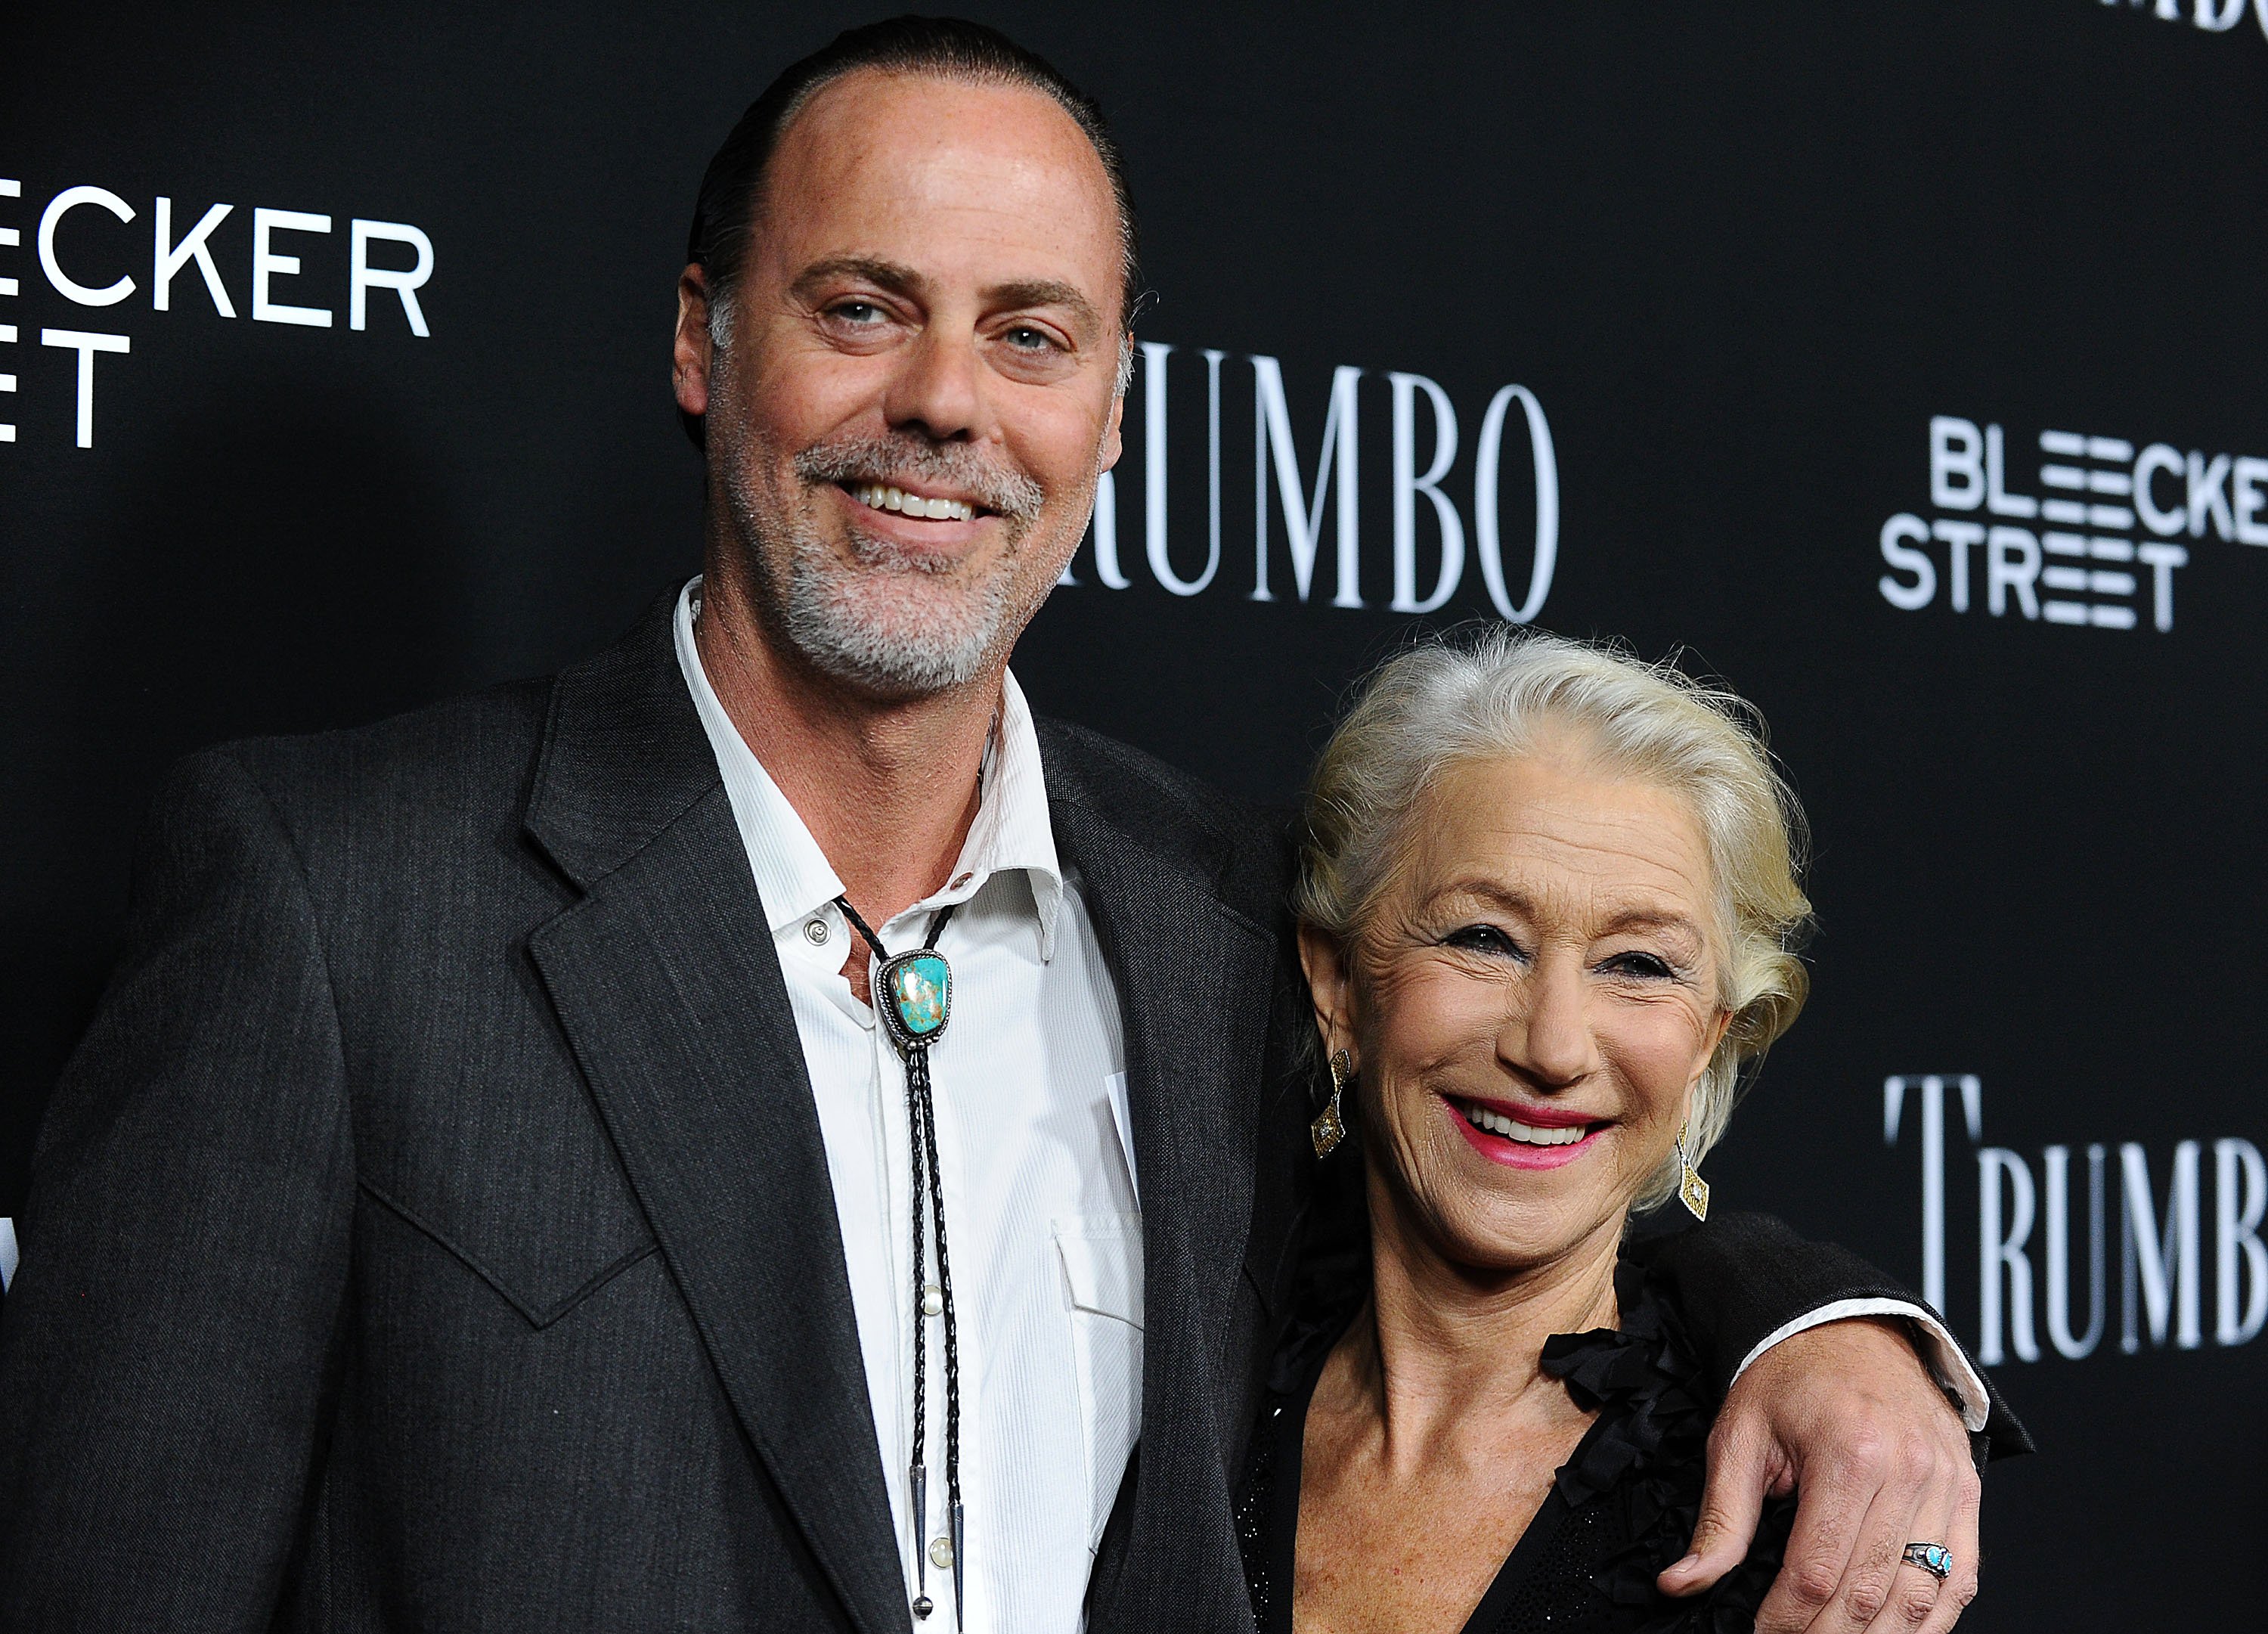 Rio Hackford and Helen Mirren at the premiere of "Trumbo" on October 27, 2015, in Beverly Hills, California. | Source: Jason LaVeris/FilmMagic/Getty Images